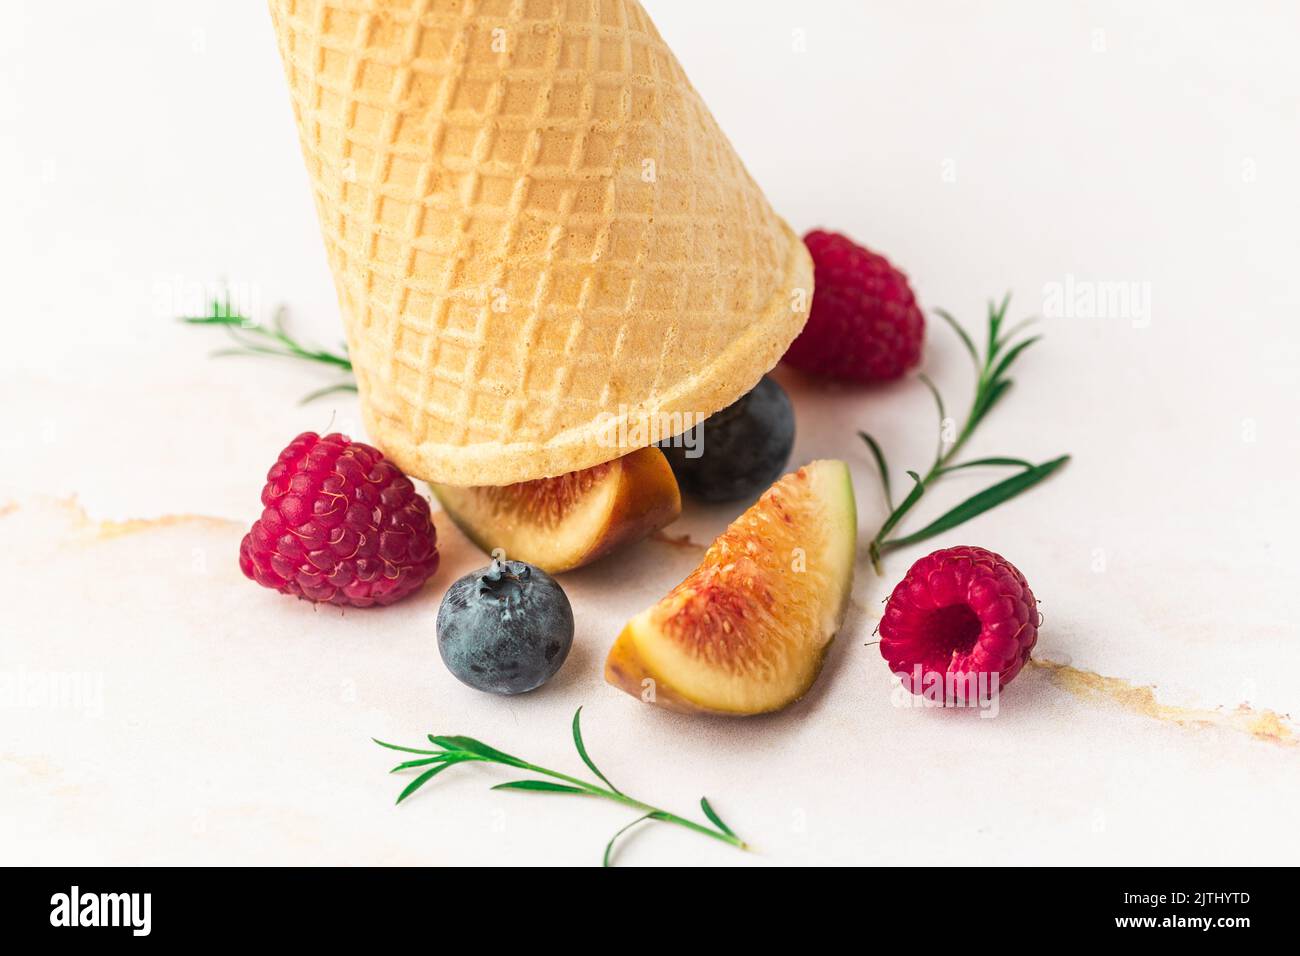 Ice cream cones with berries. Fresh berry fruit, top view of figs, blueberry, raspberry Stock Photo